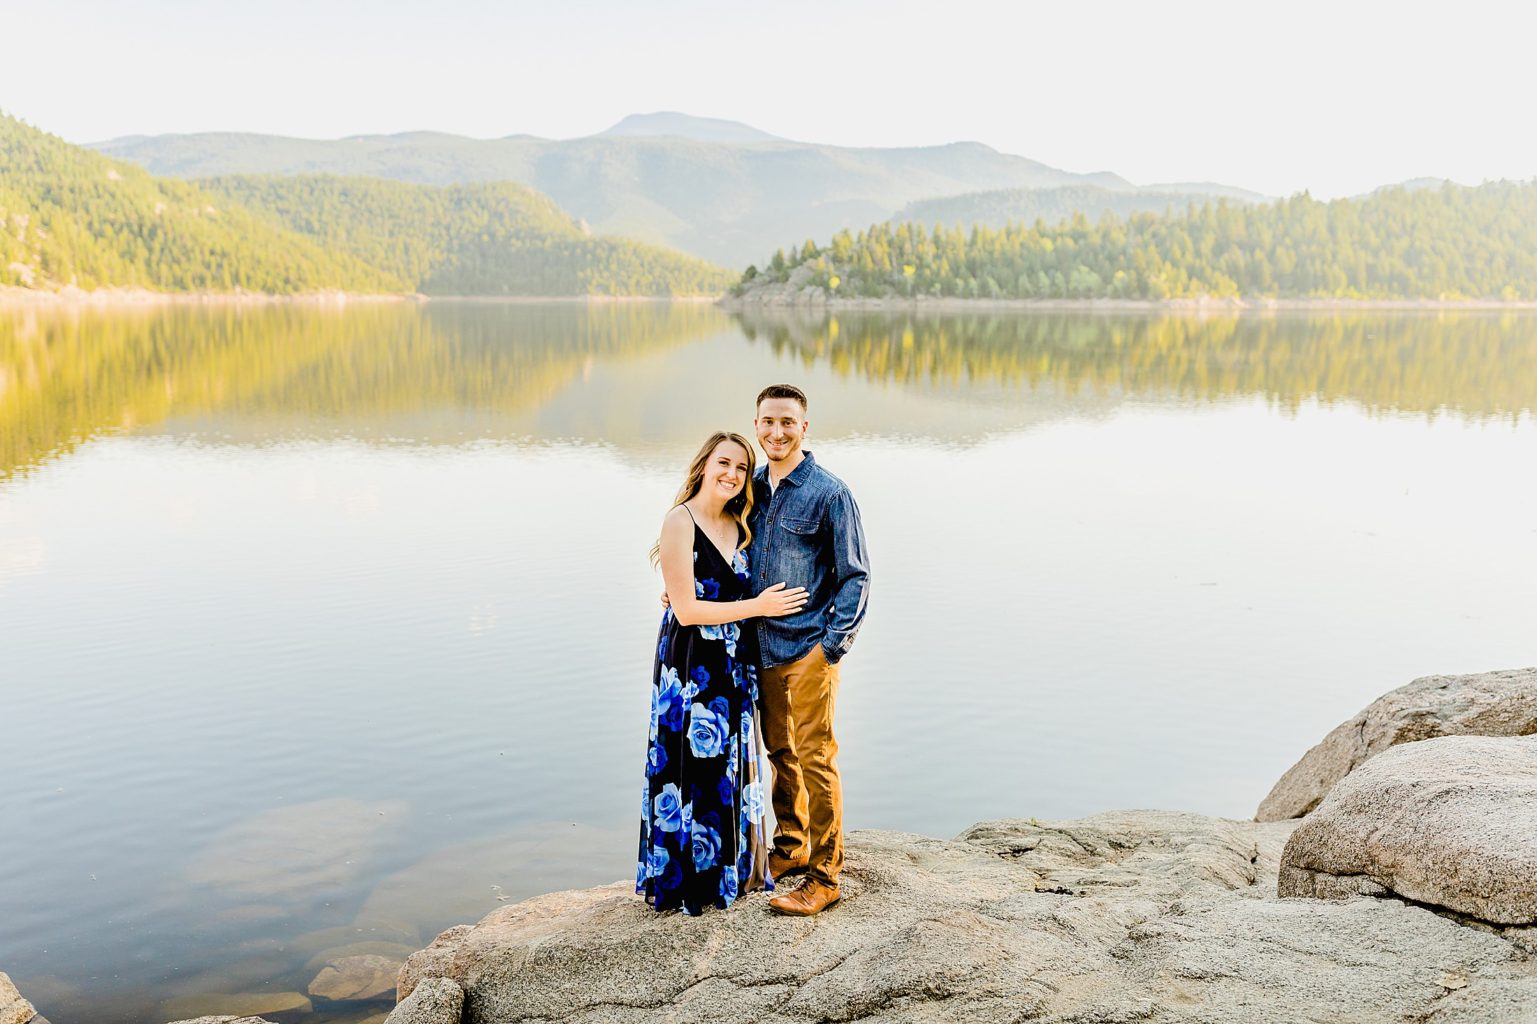 evergreen trees and lake background with couple celebrating anniversary in boulder colorado